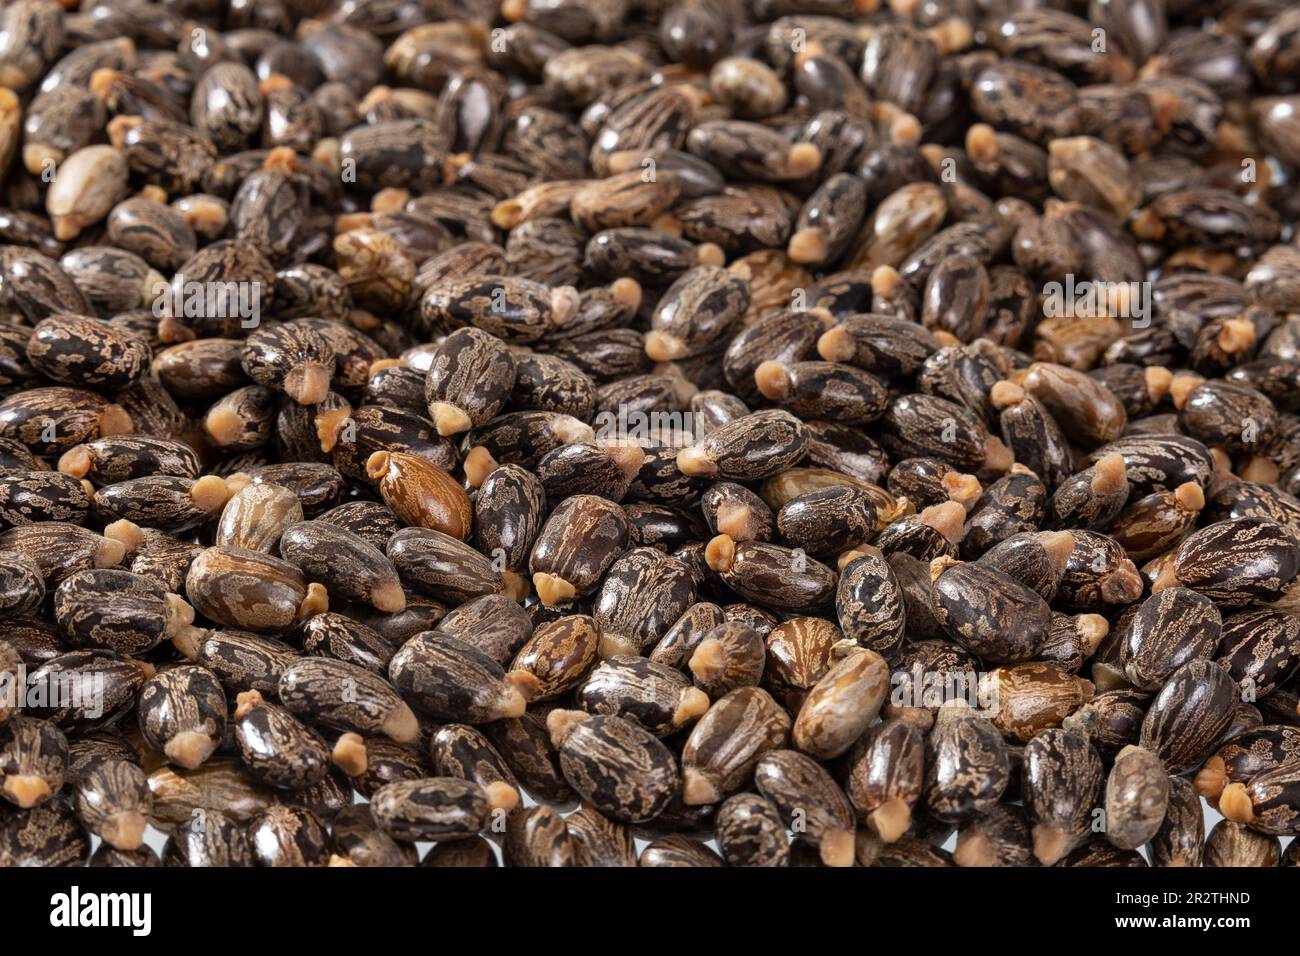 Ricinus Communis – Dried Seeds Of The Fruit Of The Castor Bean Plant Stock Photo